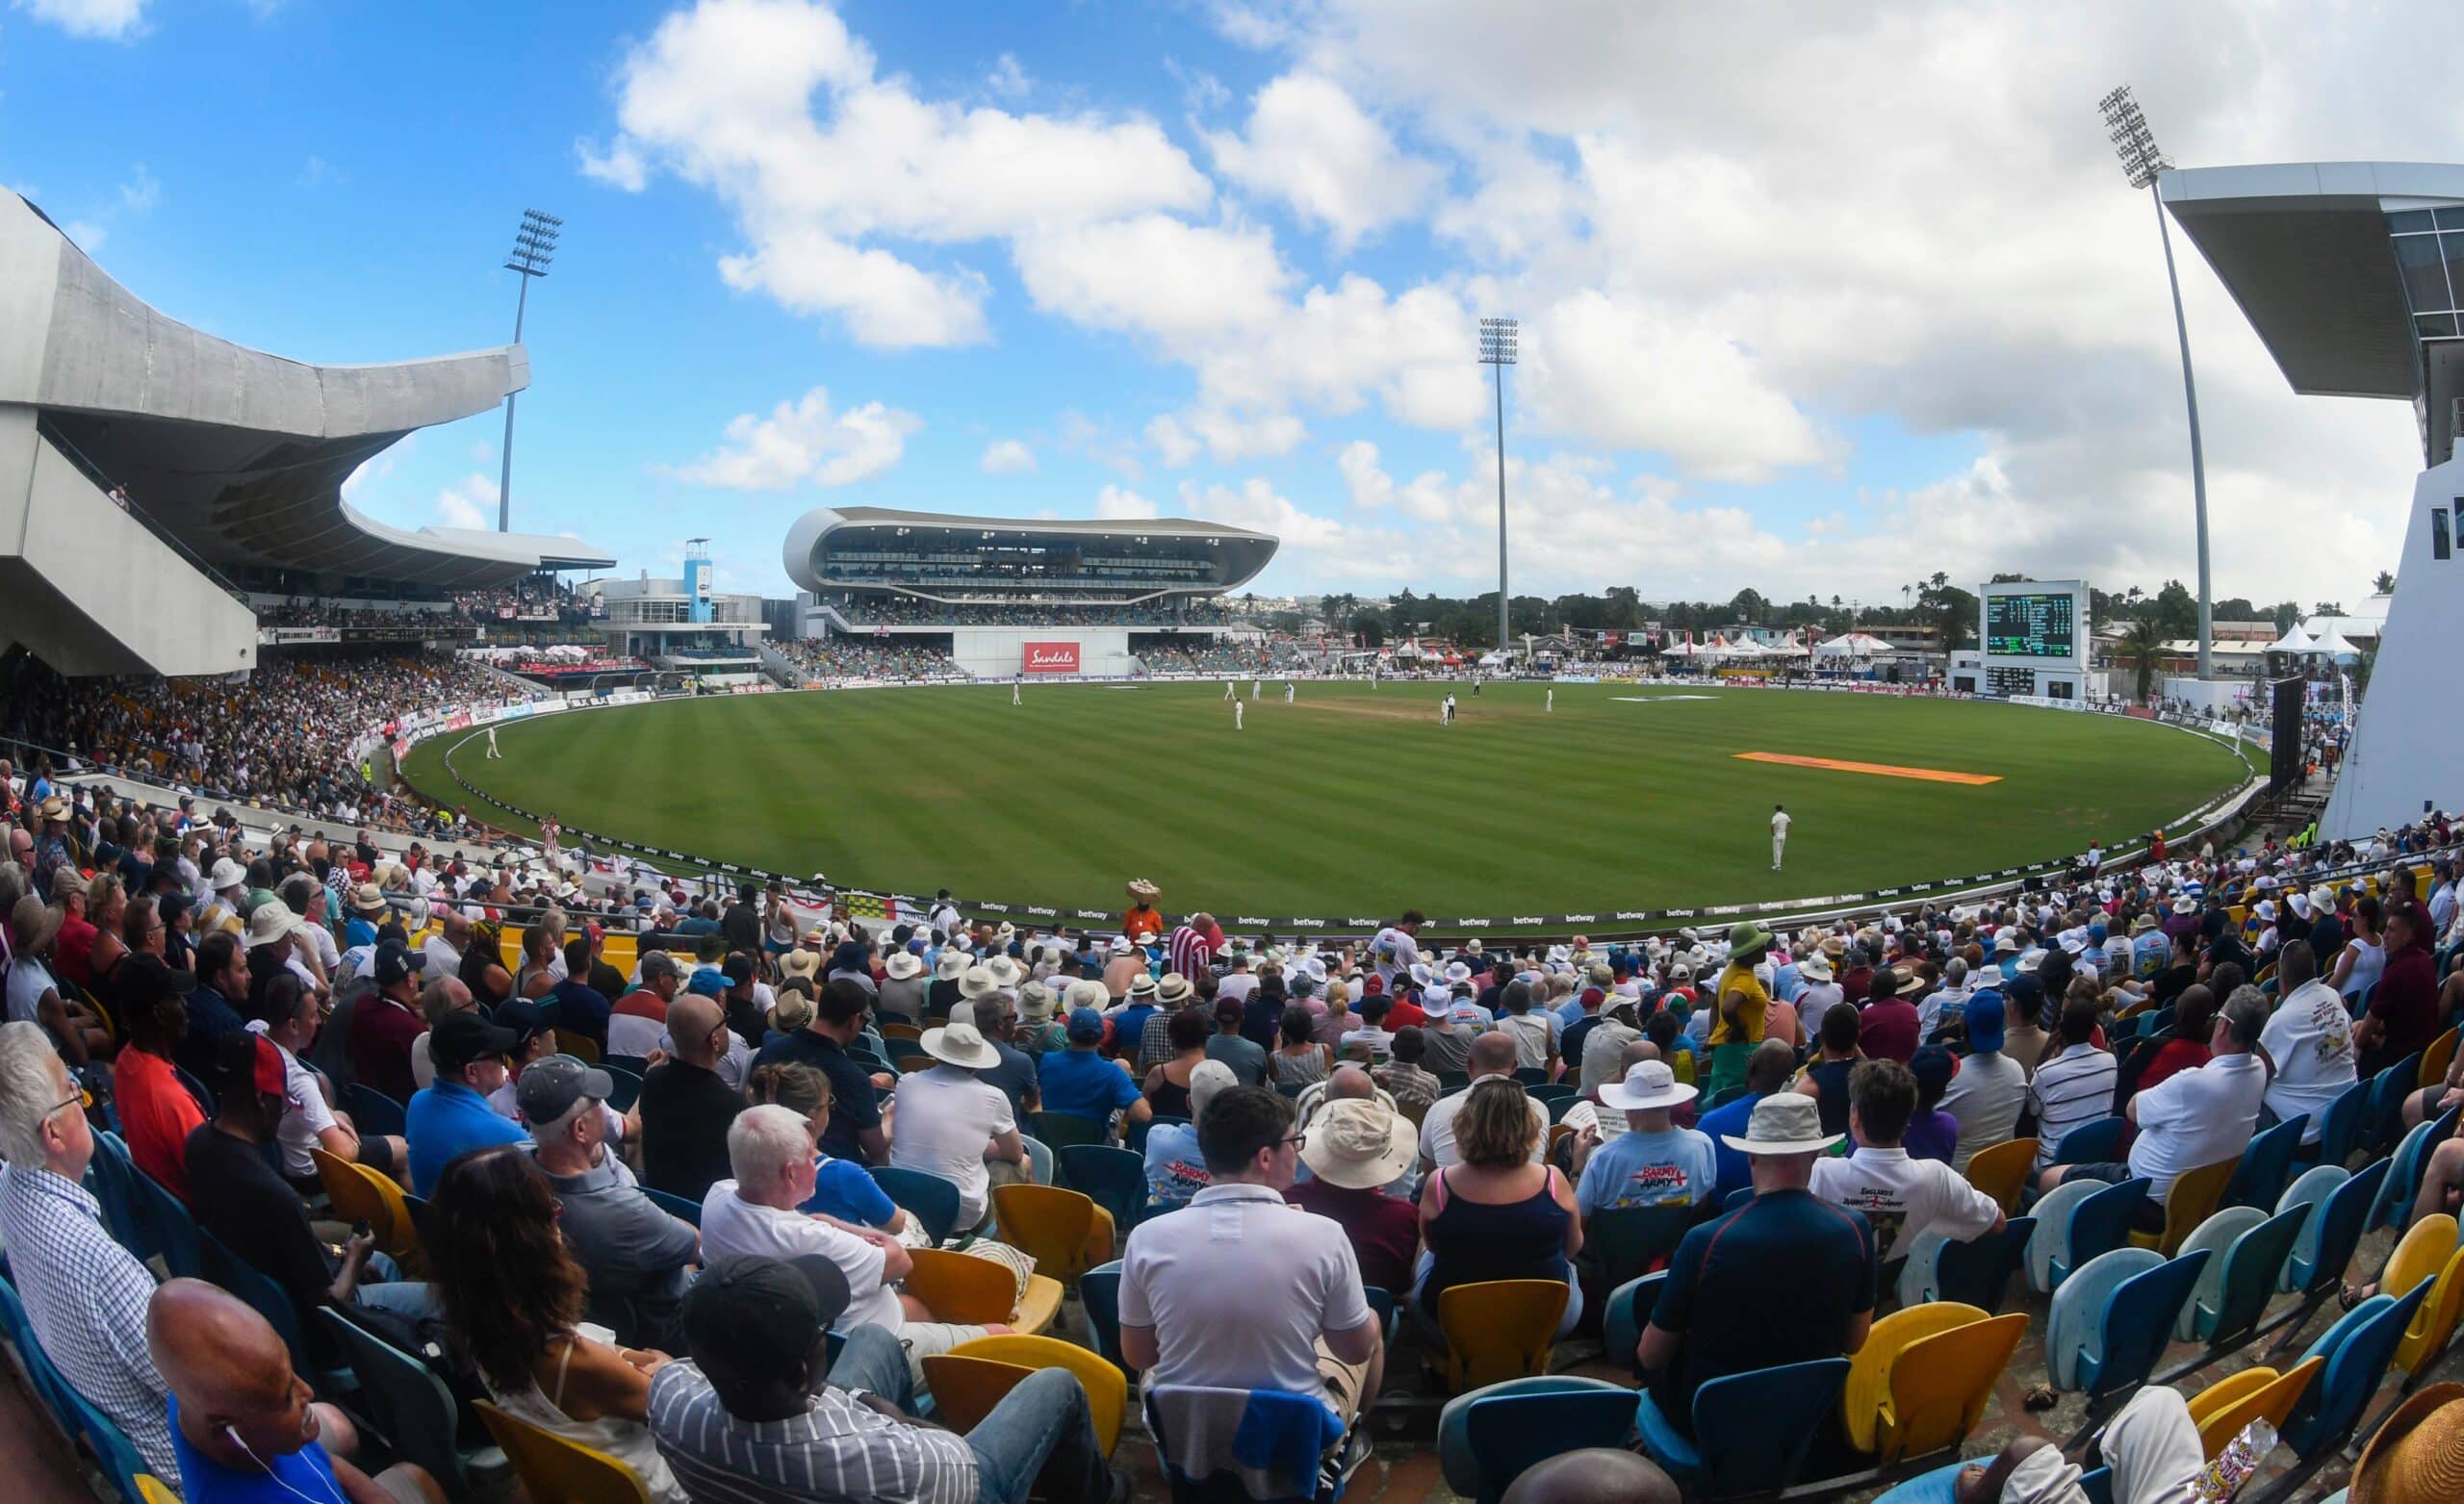 Wide view of cricket pitch with fans